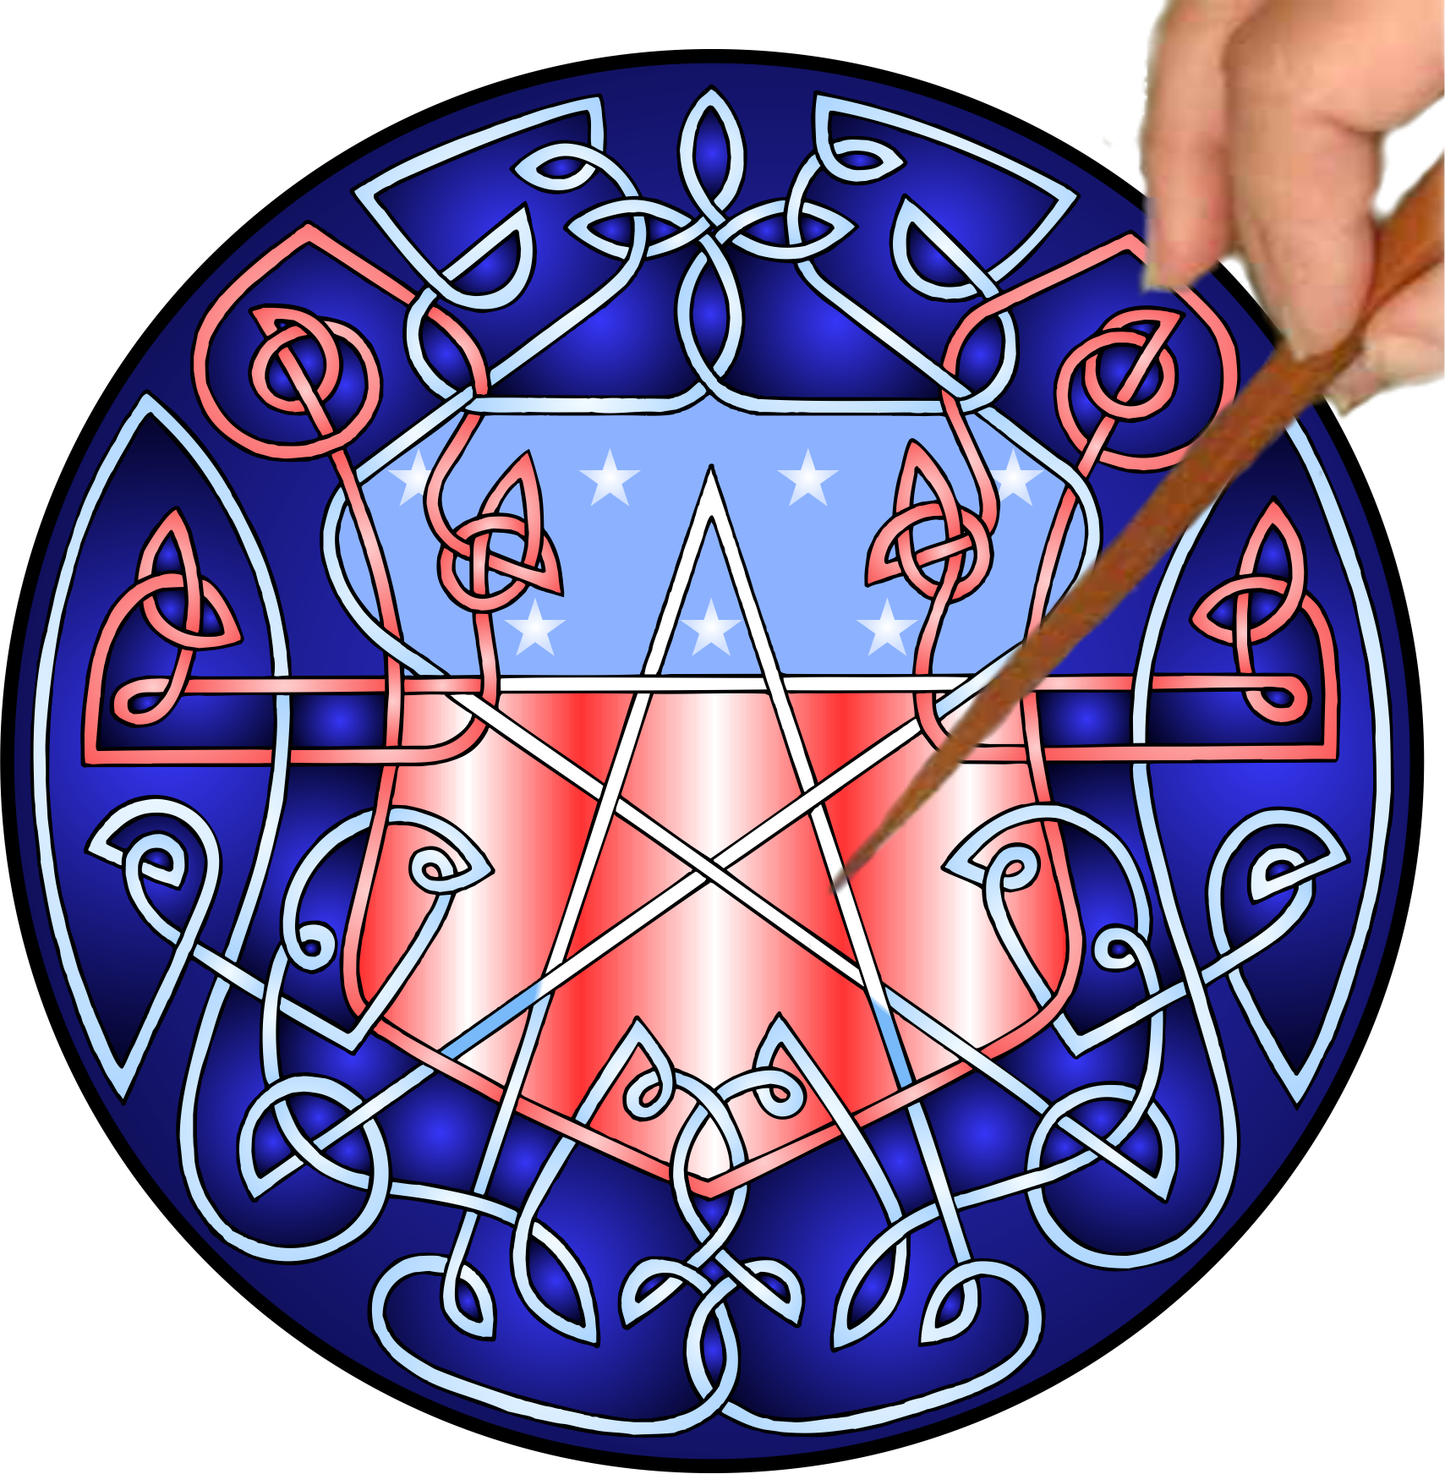 Celtic Star Shield Mandalynth - Mindful Tracing Art for Stress, Anxiety and Attention Management